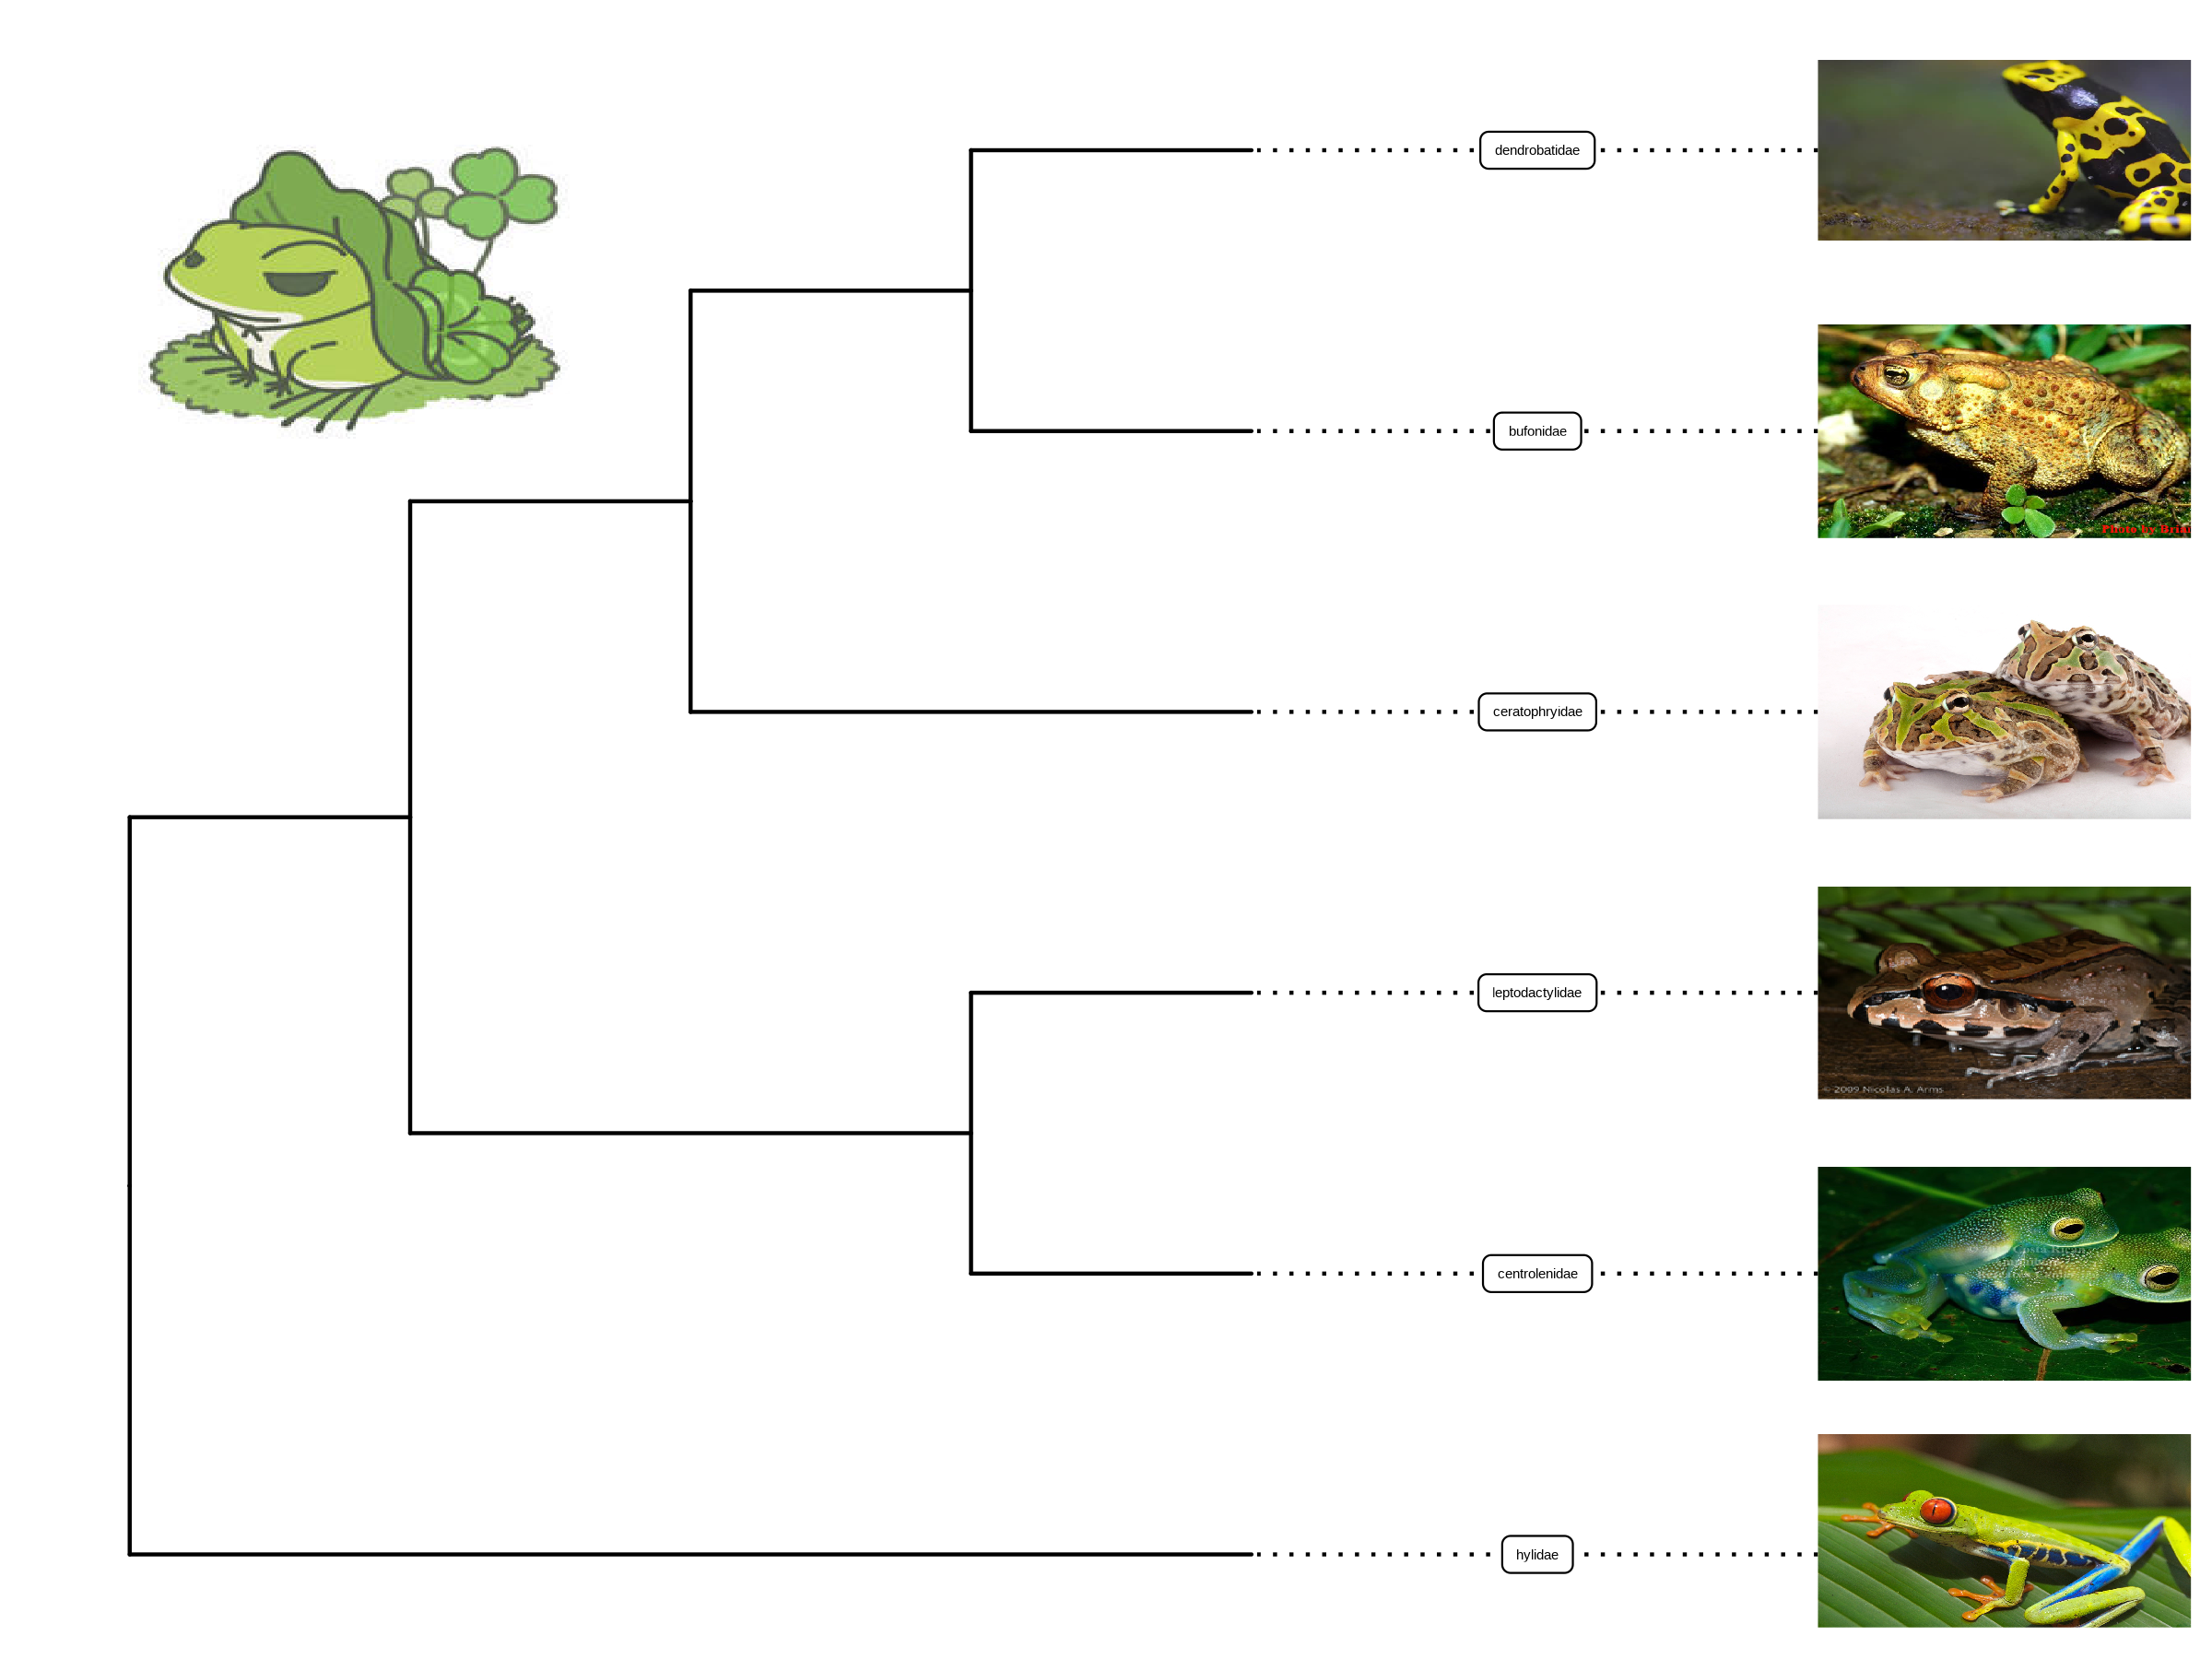 Labelling taxa with images. Users need to specify geom = 